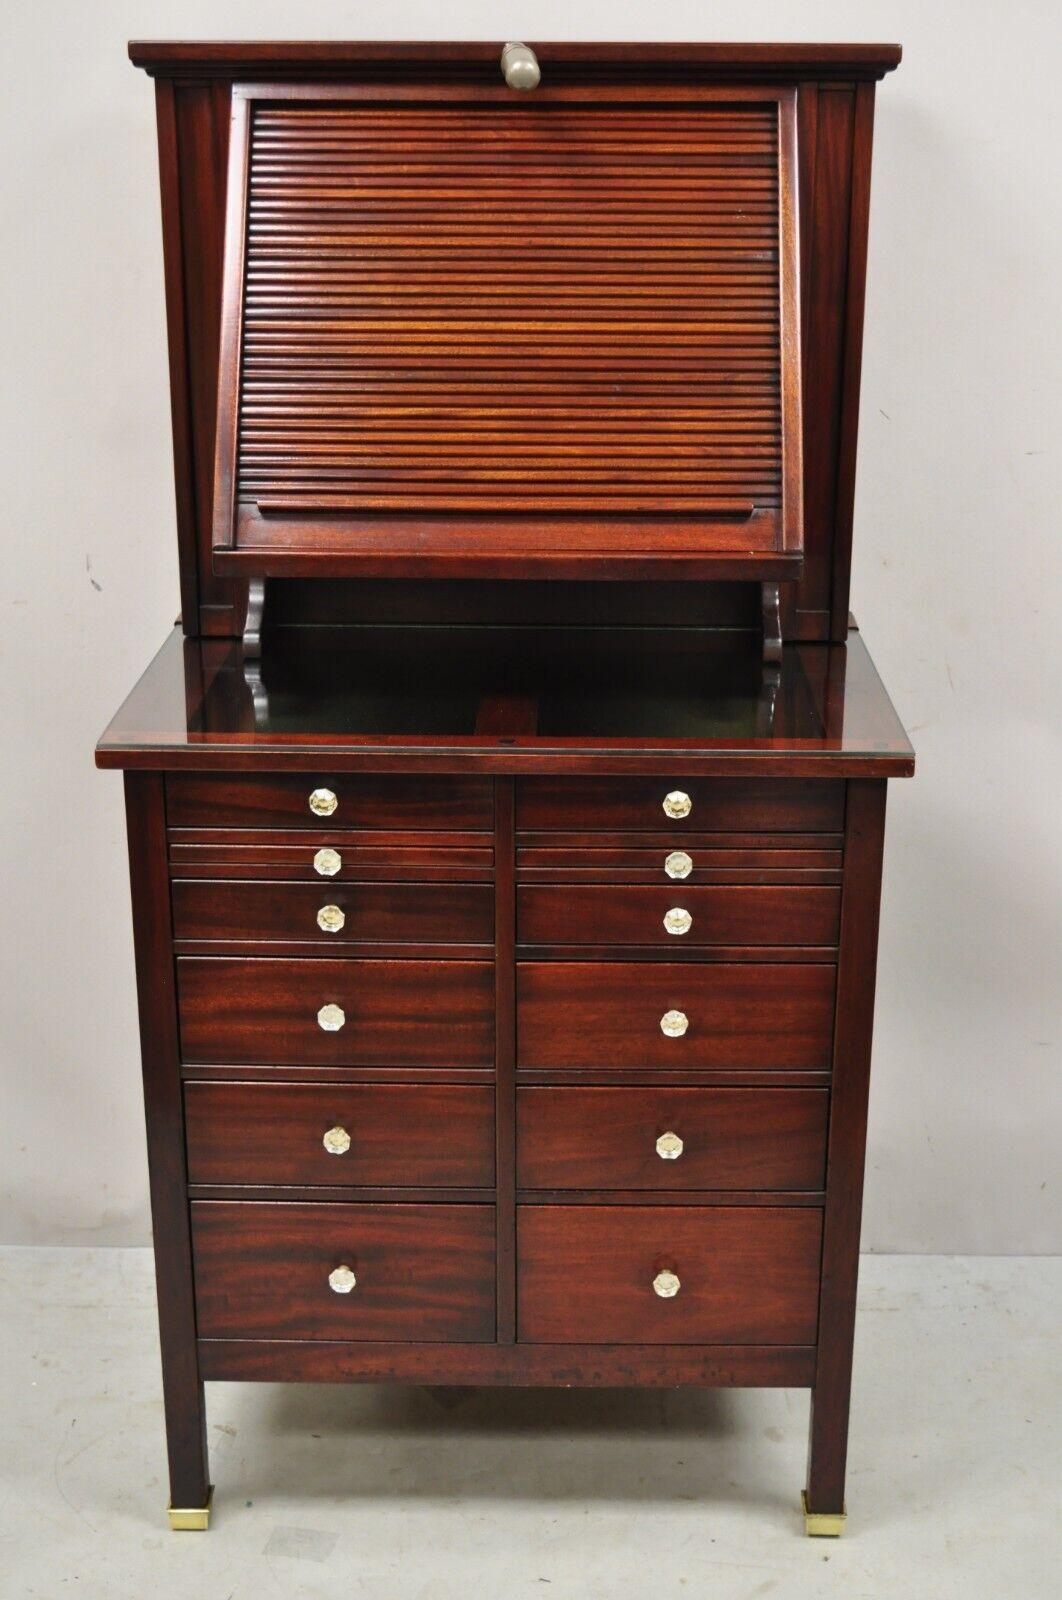 Antique Mahogany Genothalmic Cabinet by General Optical Co. Roll Top Medical Work Desk Station. Item features brass capped feet, glass display surface, green felt lined top drawers, single work/task light, roll top with storage interior, panel back,